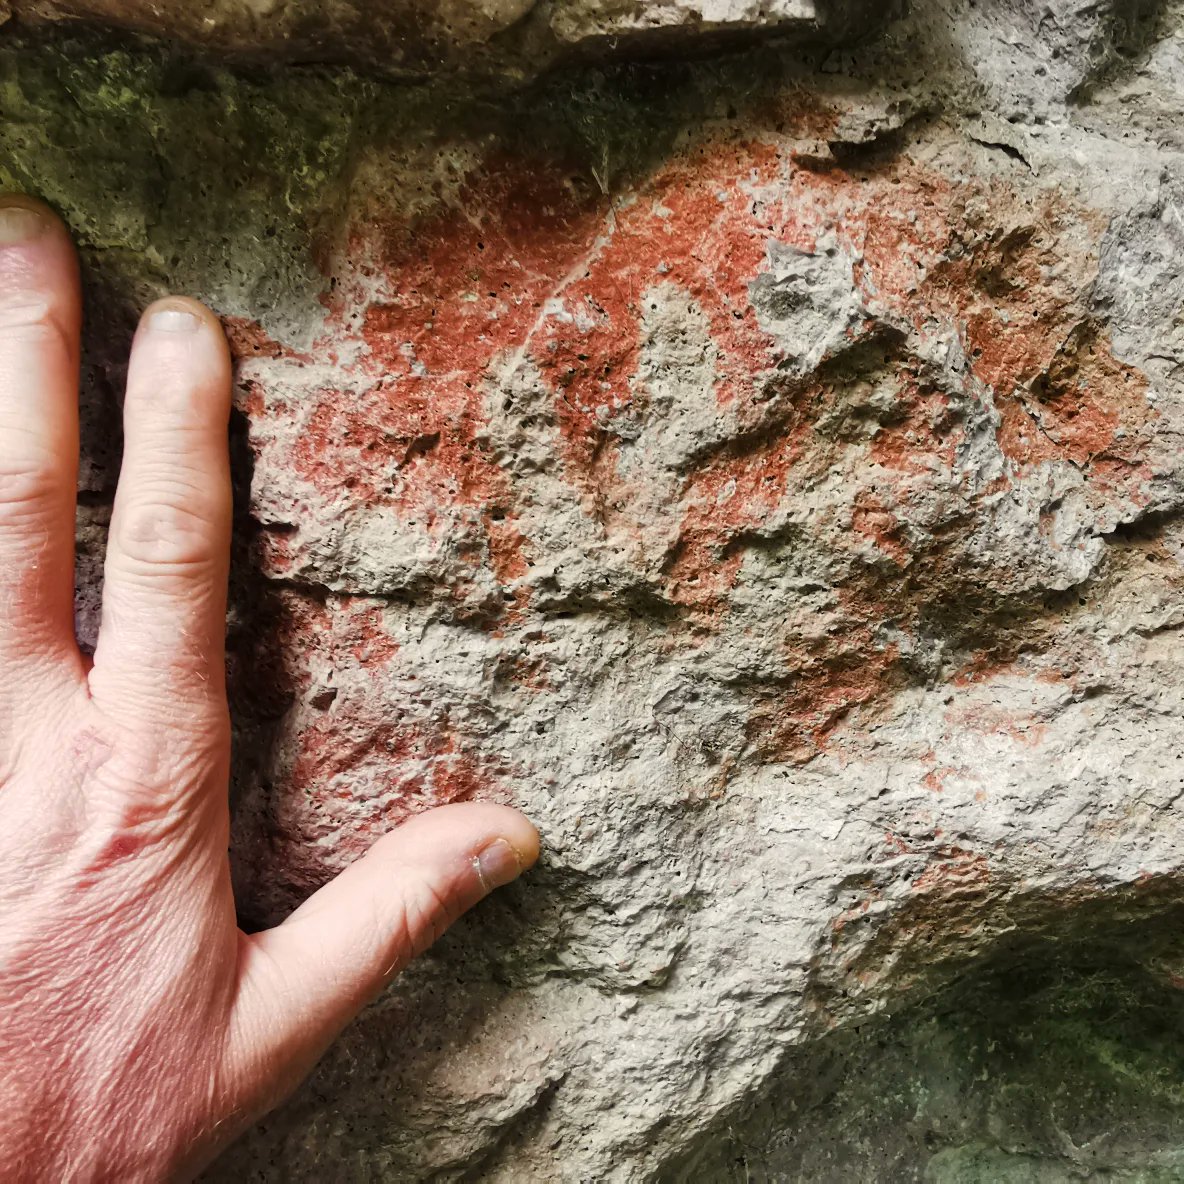 #Prehistoric handprints in a cave here in #Patagonia. Filming the natural world is great but ocassionally you stumble across something from our own distant past that makes you think very hard about where we've come from and where we might be headed. #WildlifeFilming #caveart